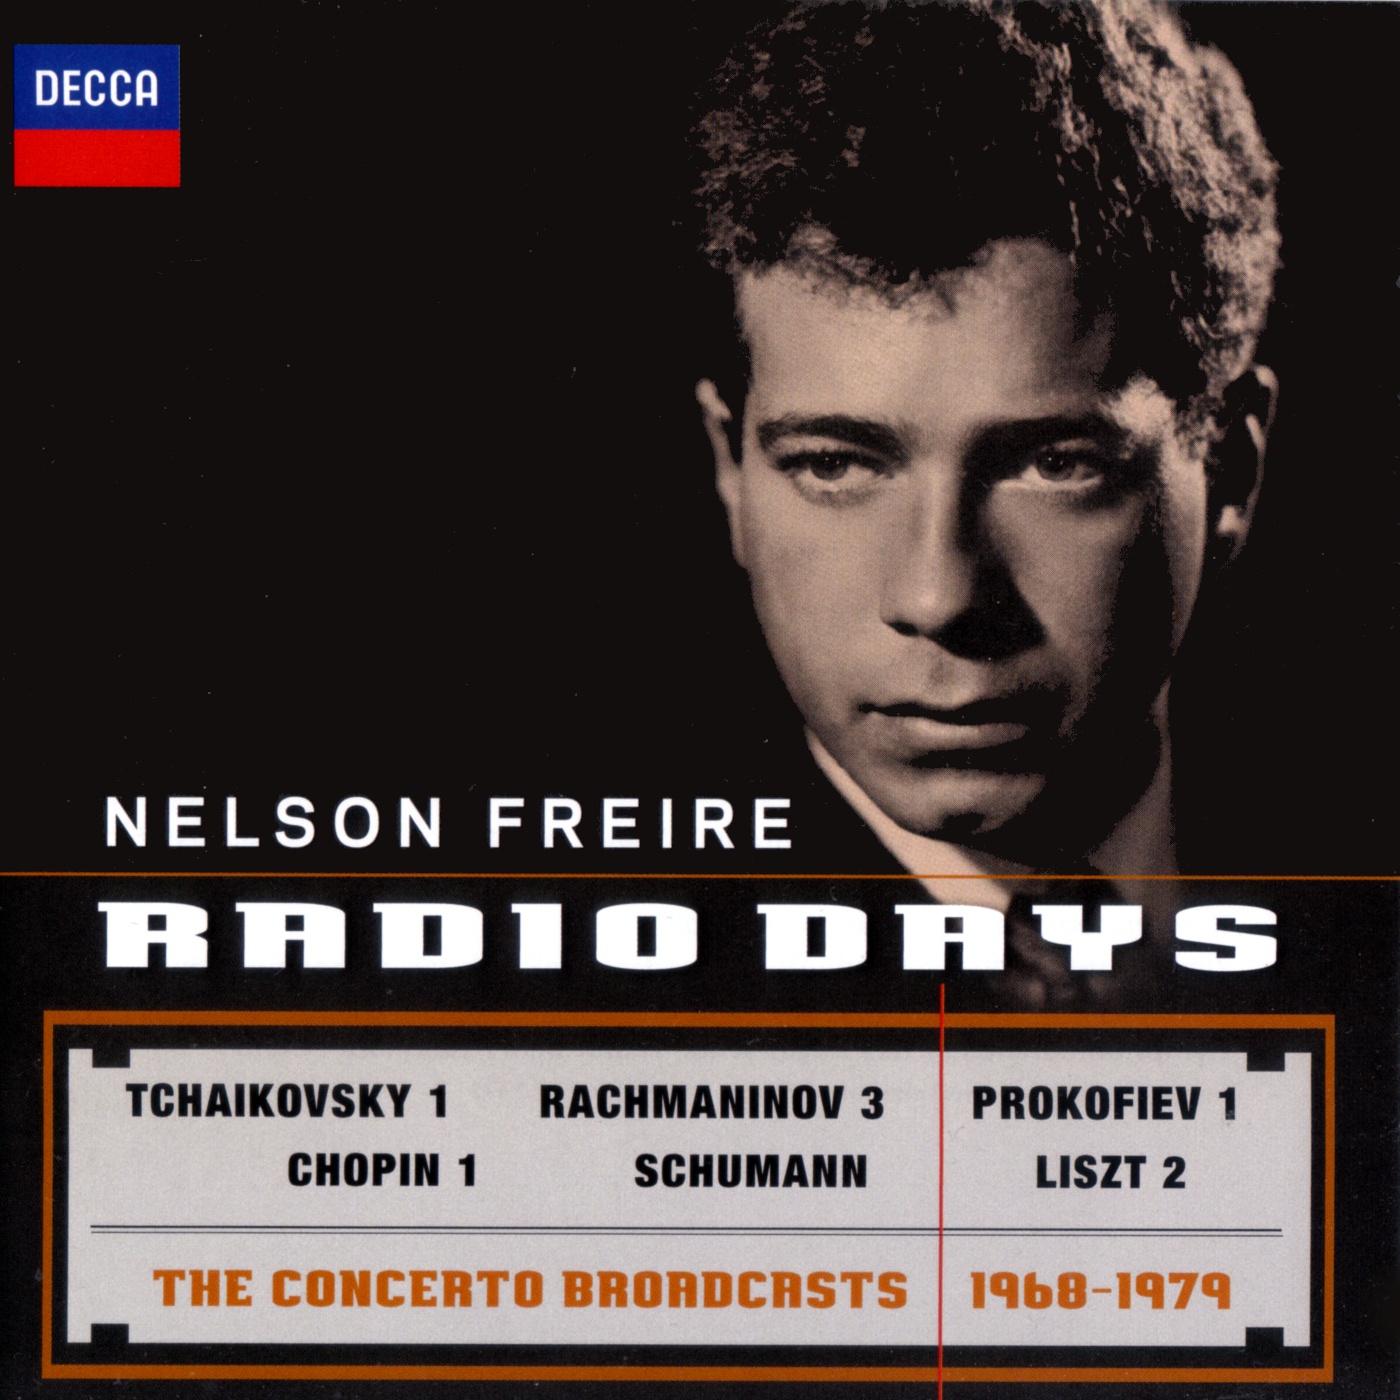 Nelson Freire: Radio Days - The Concerto Broadcasts 1968-1979